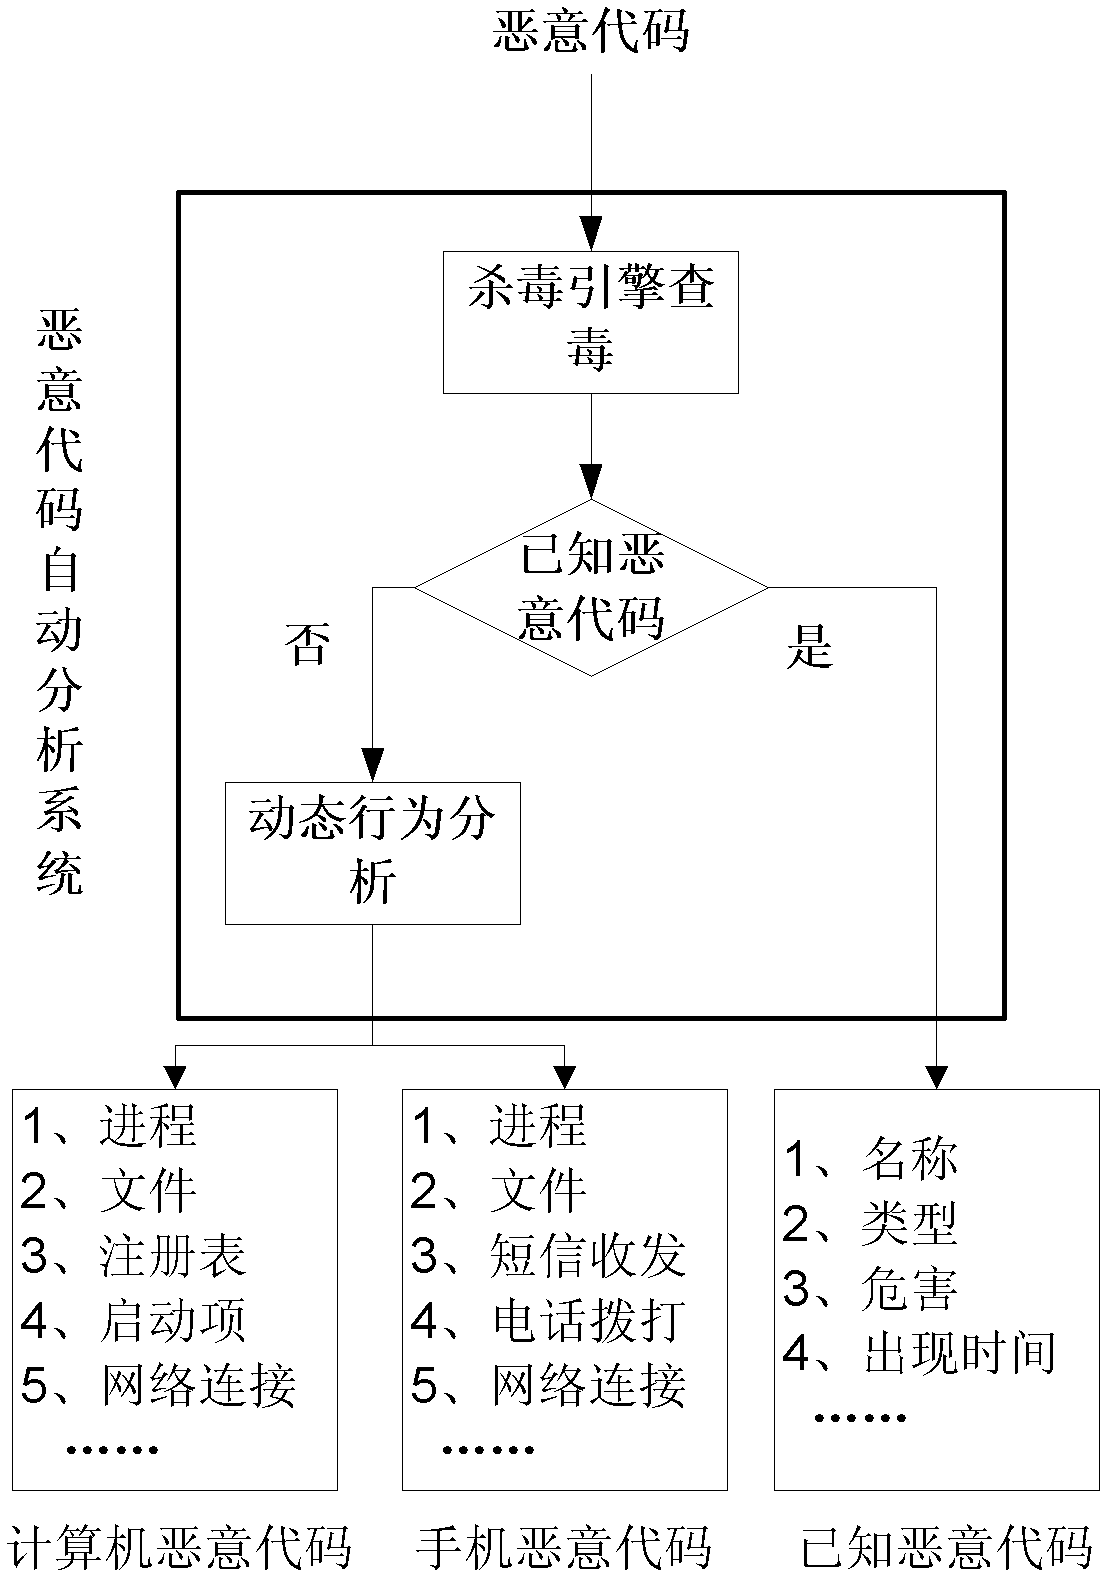 Automatic malicious code analysis method and system